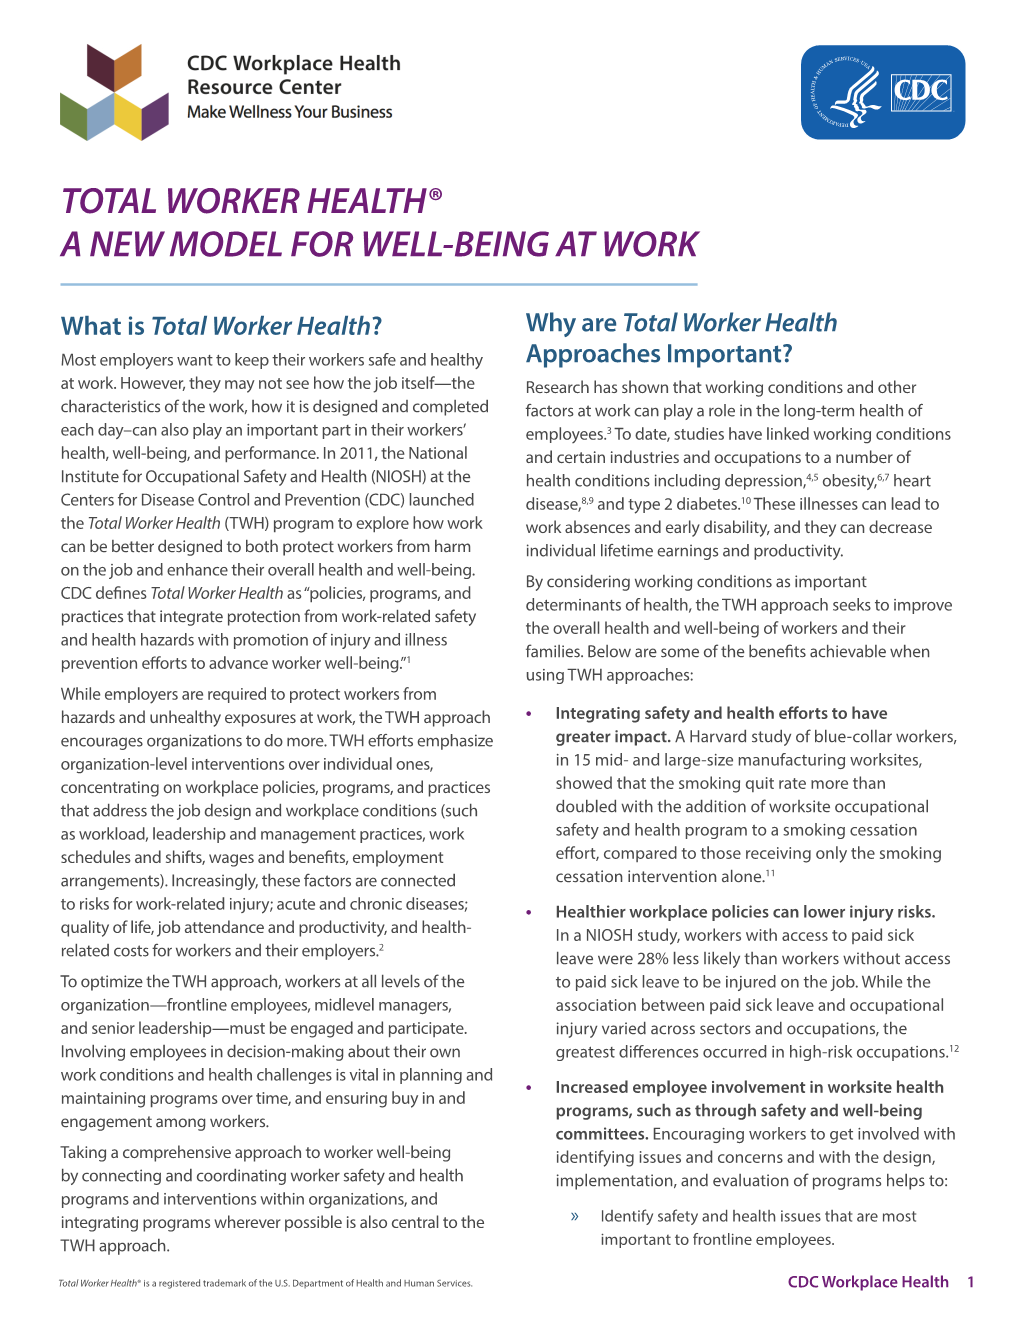 Total Worker Health® a New Model for Well-Being at Work